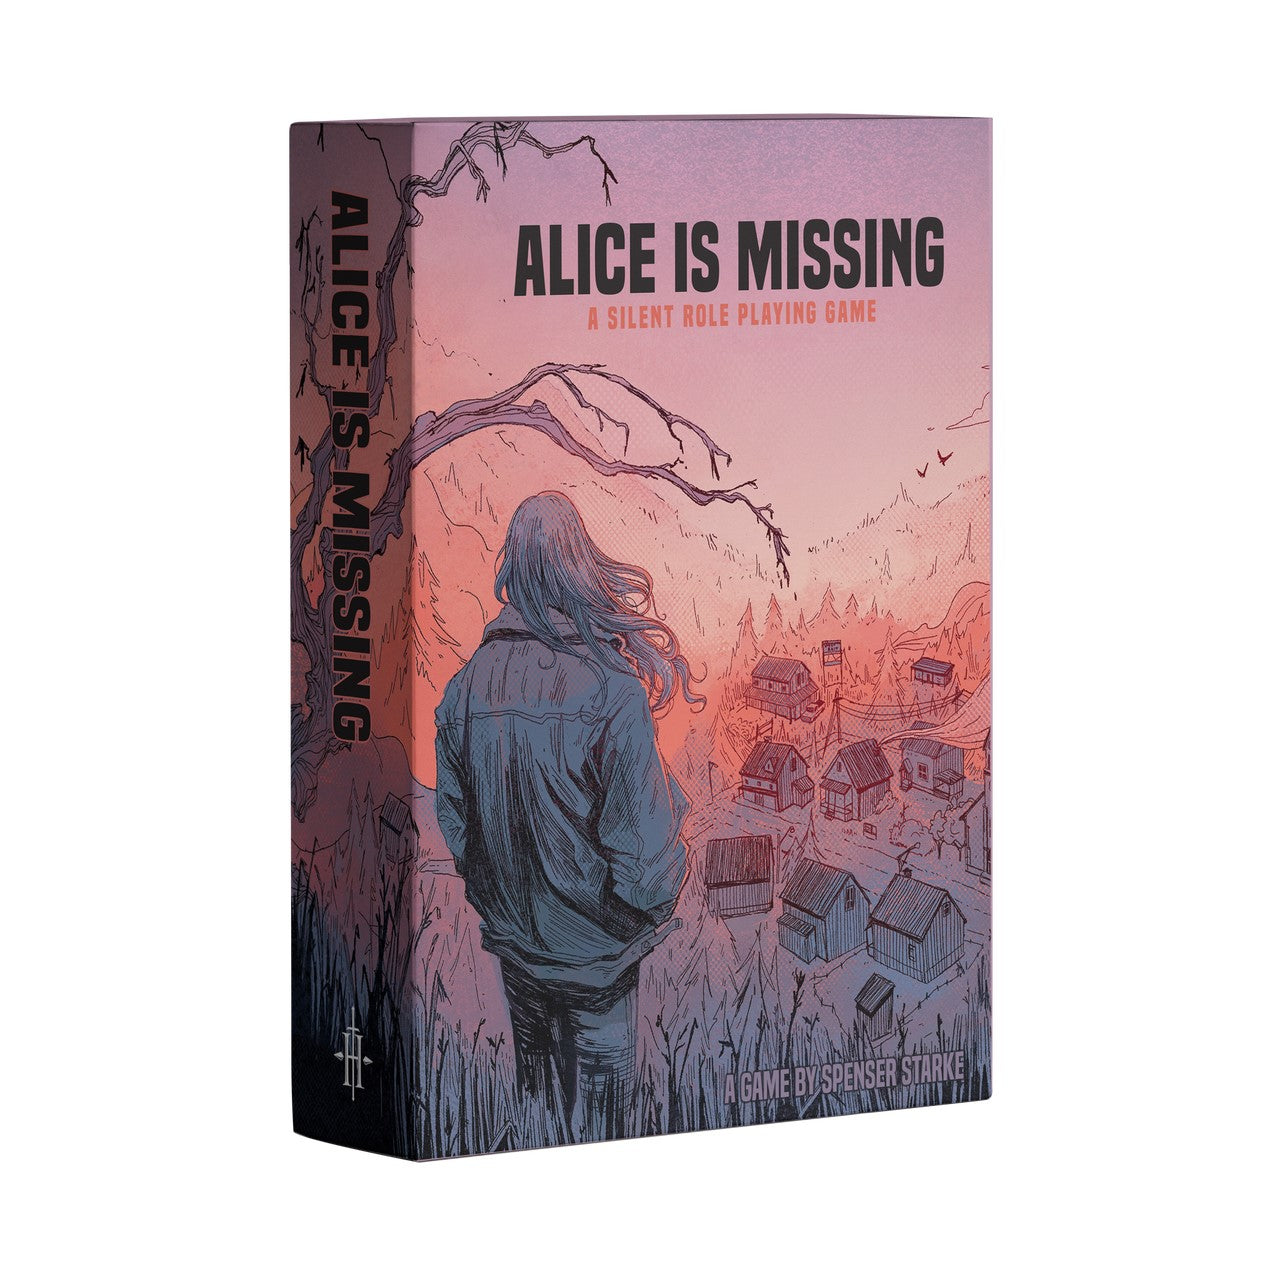 Alice is Missing: A Silent Role Playing Game